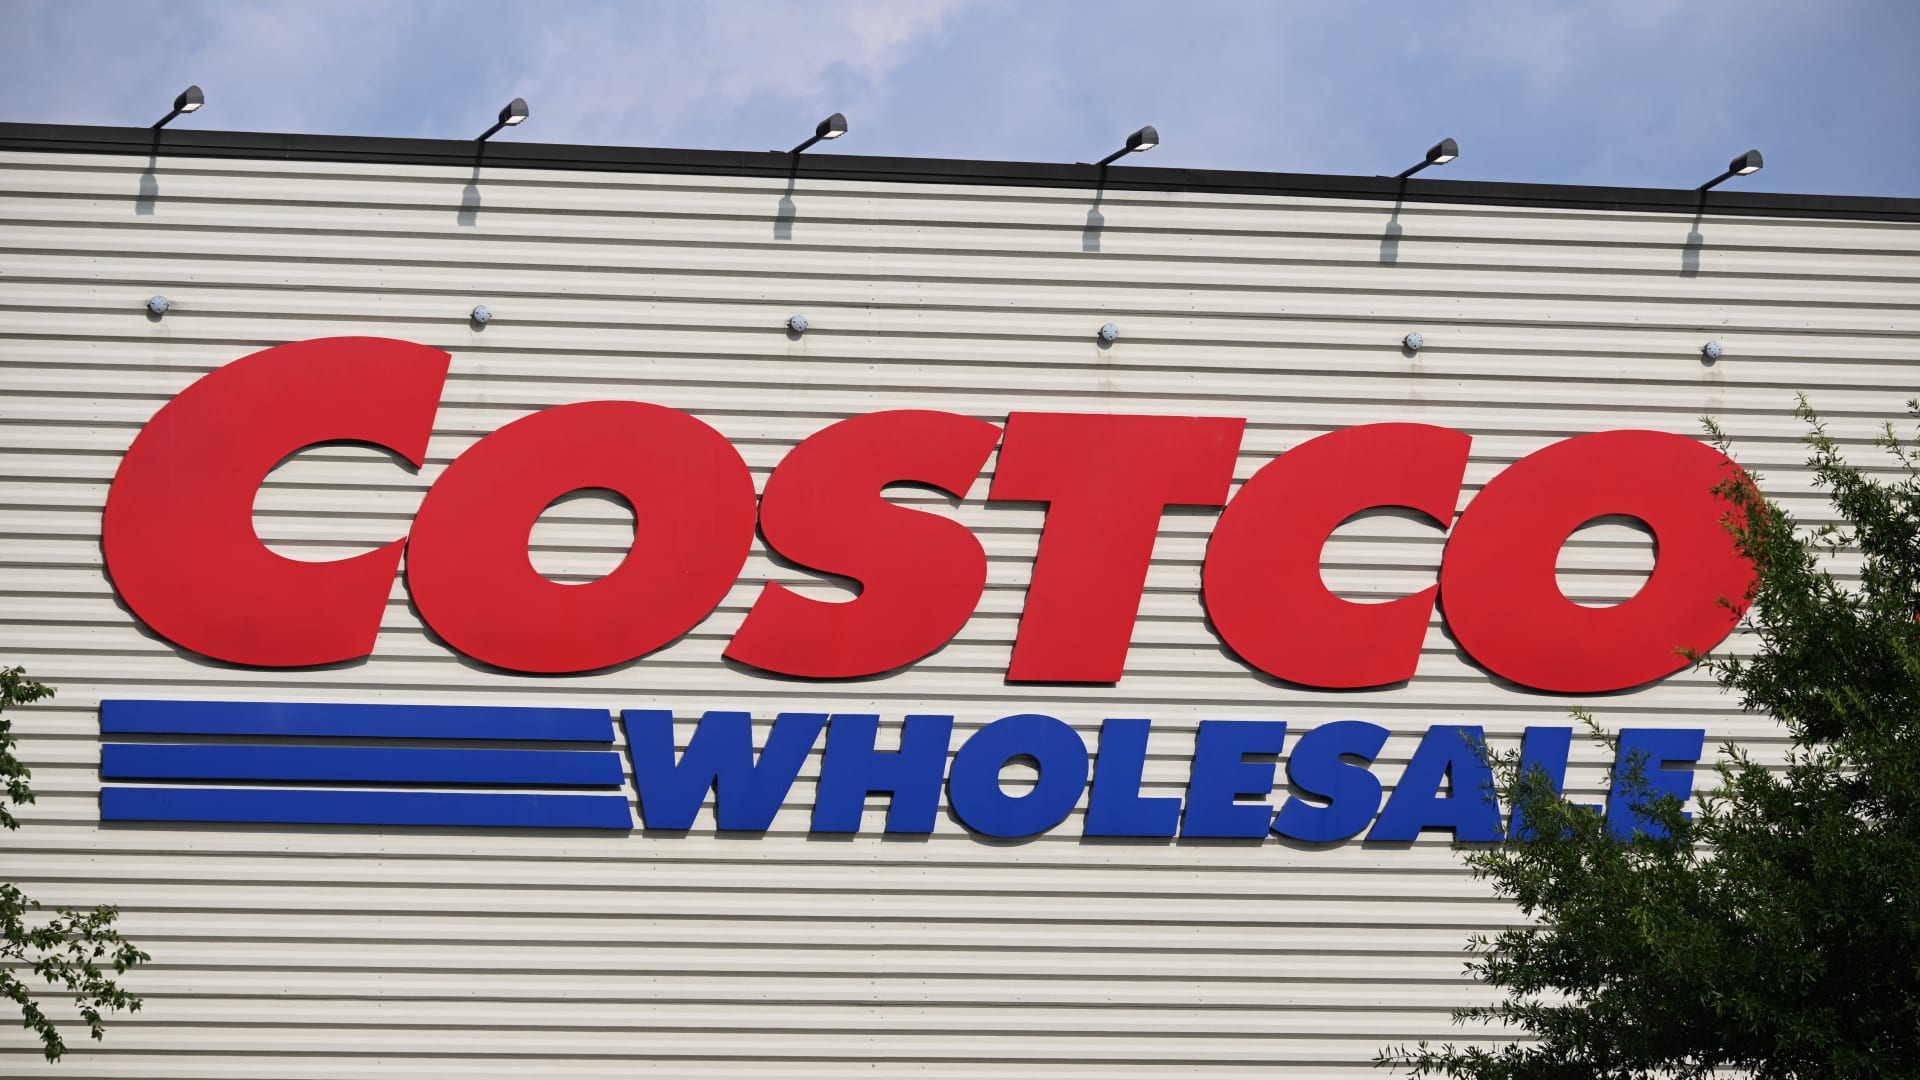 Jim Cramer: Costco has room to run despite a rich valuation and shares nearing all-time highs